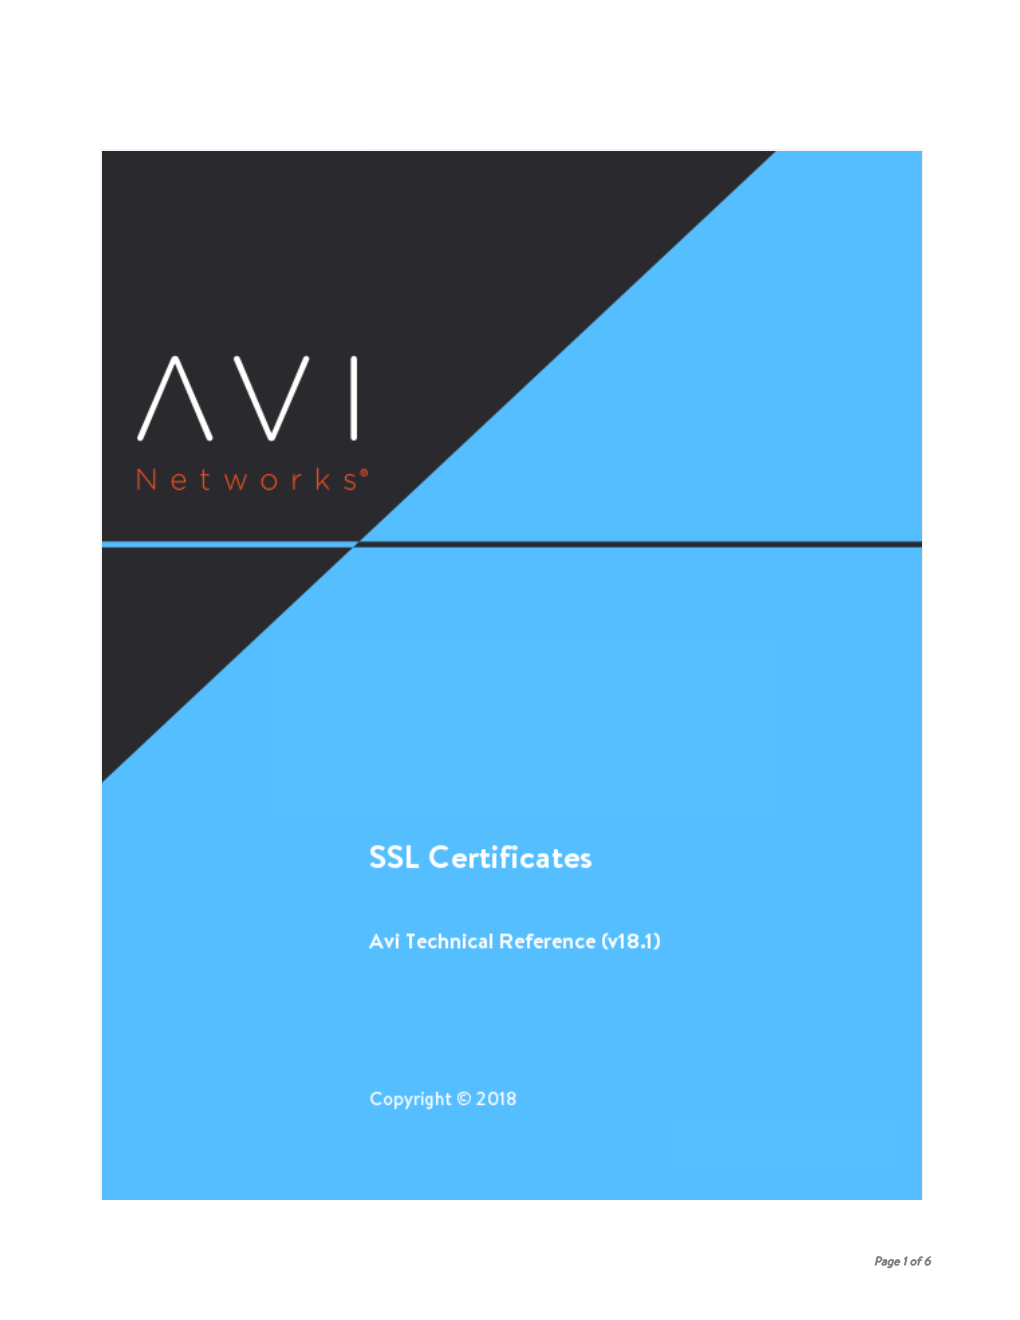 SSL Certificates Avi Networks — Technical Reference (18.1)